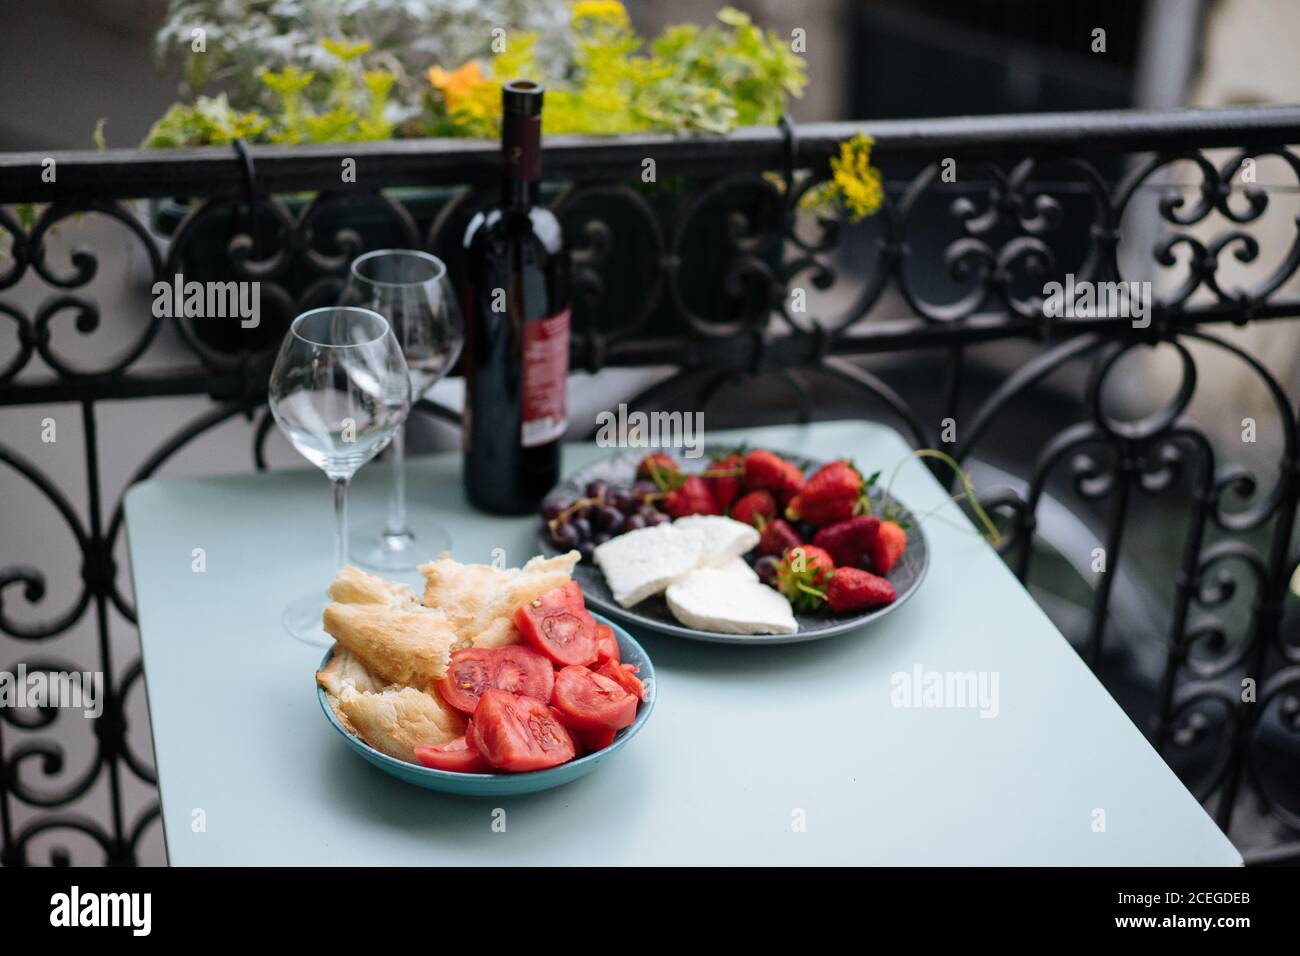 Bottle of wine and delicate glasses with high stems standing on table with sliced tomatoes, bread, cheese and berries lying on plates with ornamental fence and plants on background Stock Photo